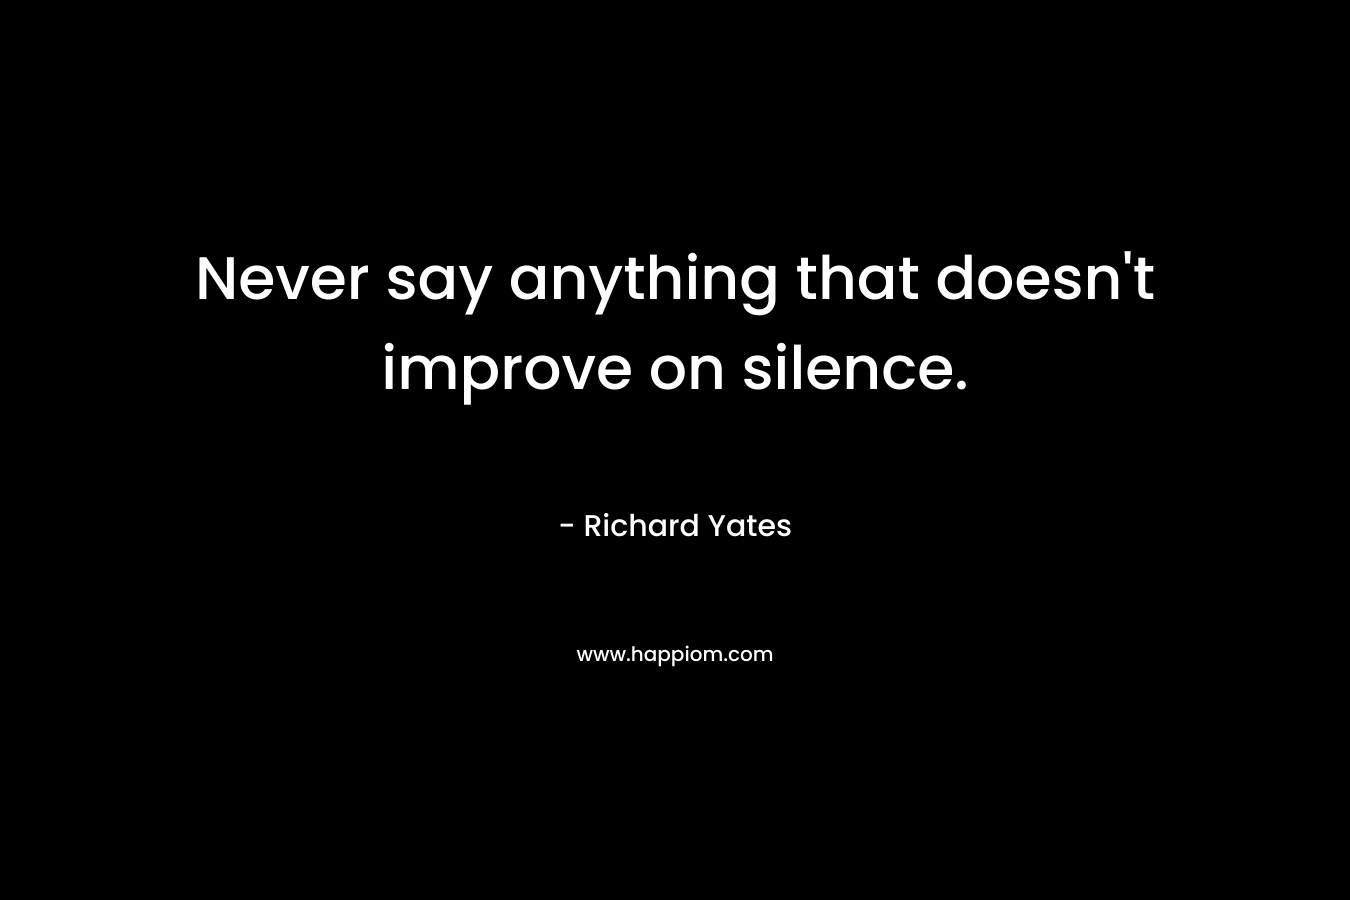 Never say anything that doesn't improve on silence.